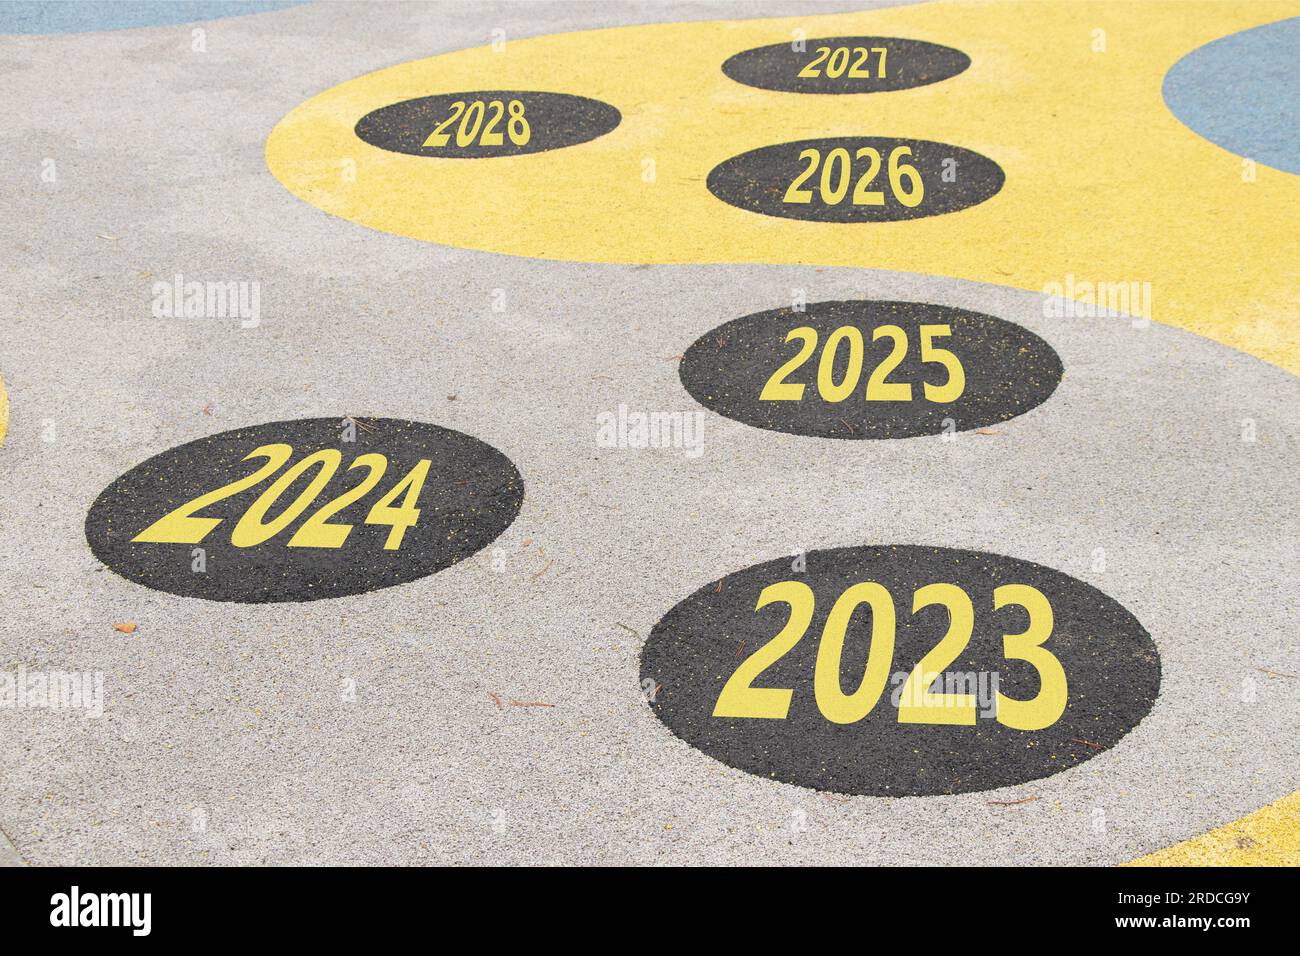 The years from 2023 to 2028 are written on the road in circles on the playground on the floor in Ukraine, achievements and successes in the new year, Stock Photo